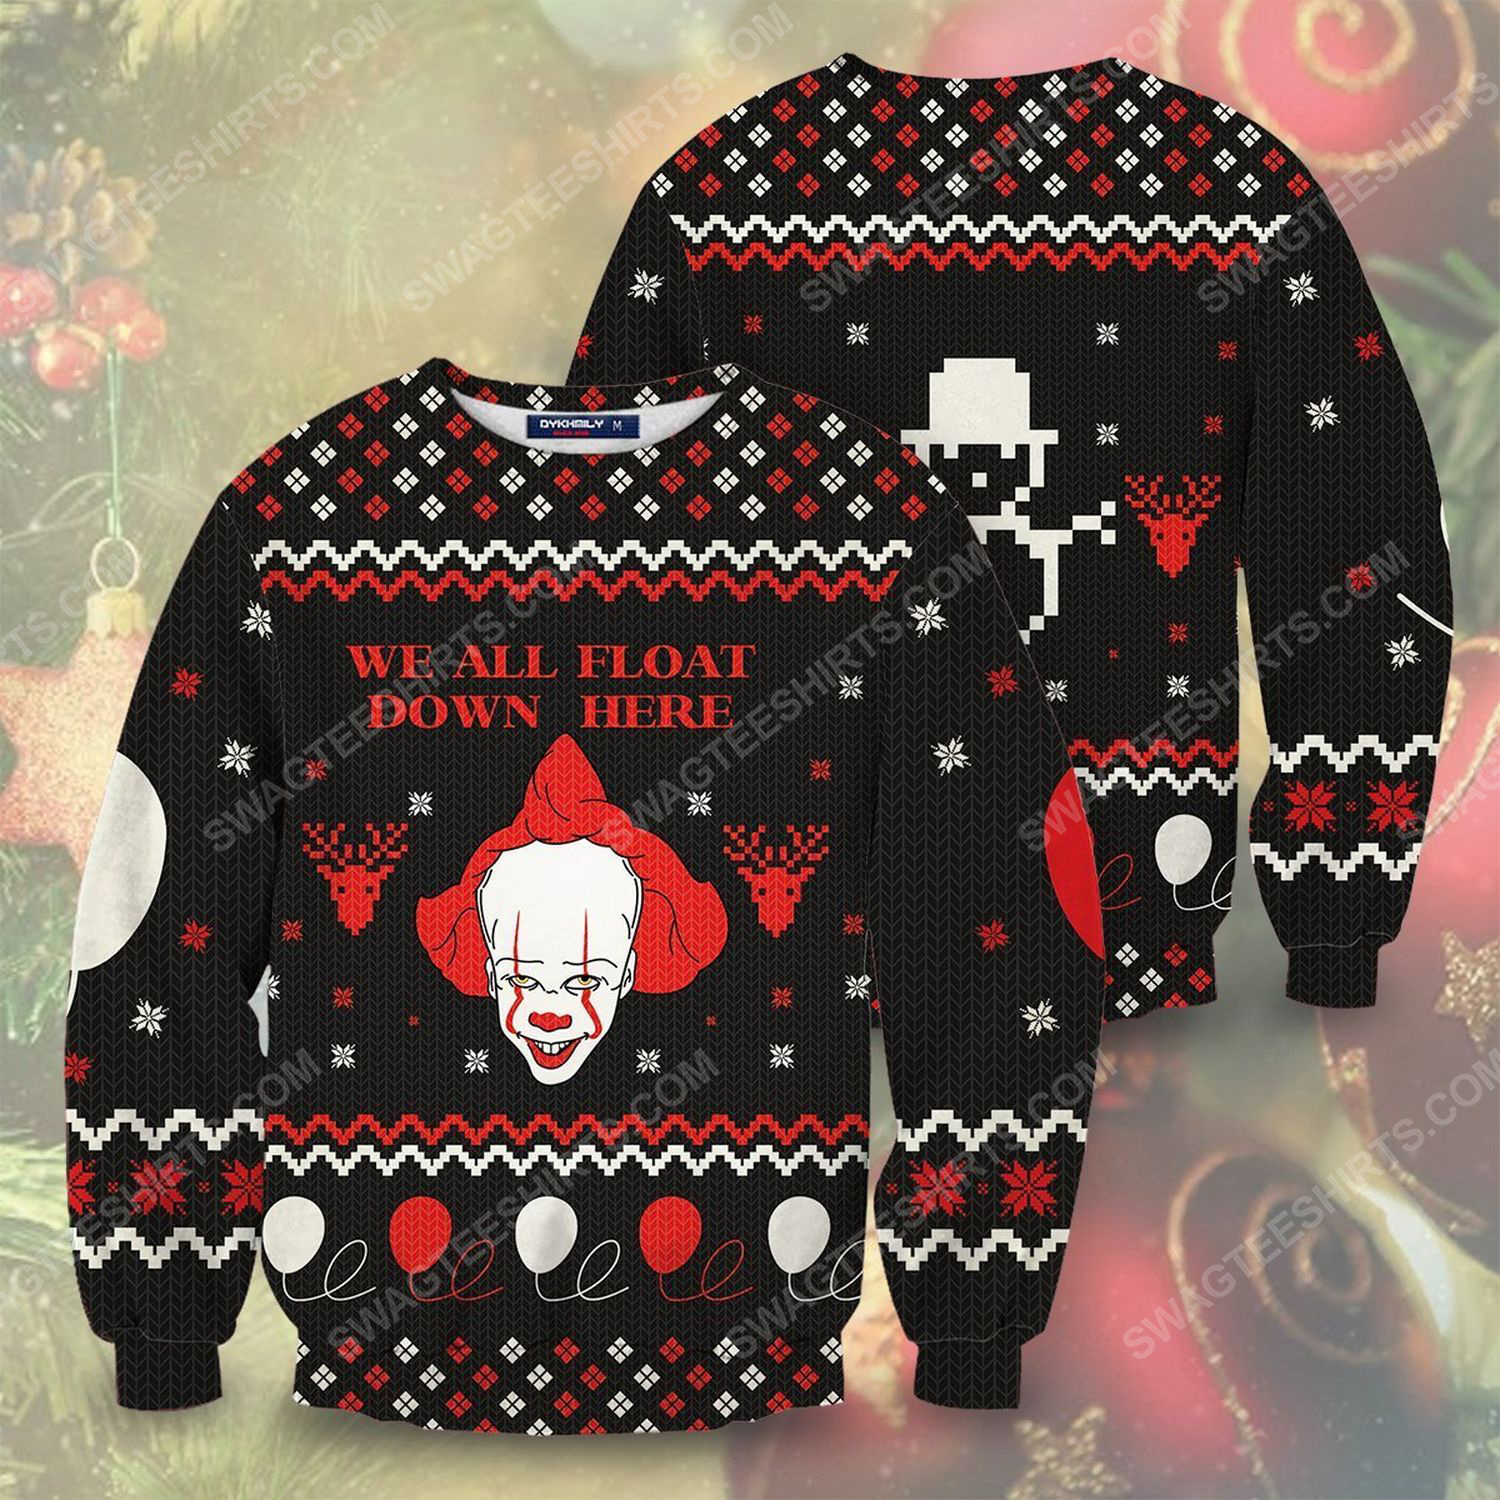 IT pennywise we all float down here ugly christmas sweater 2